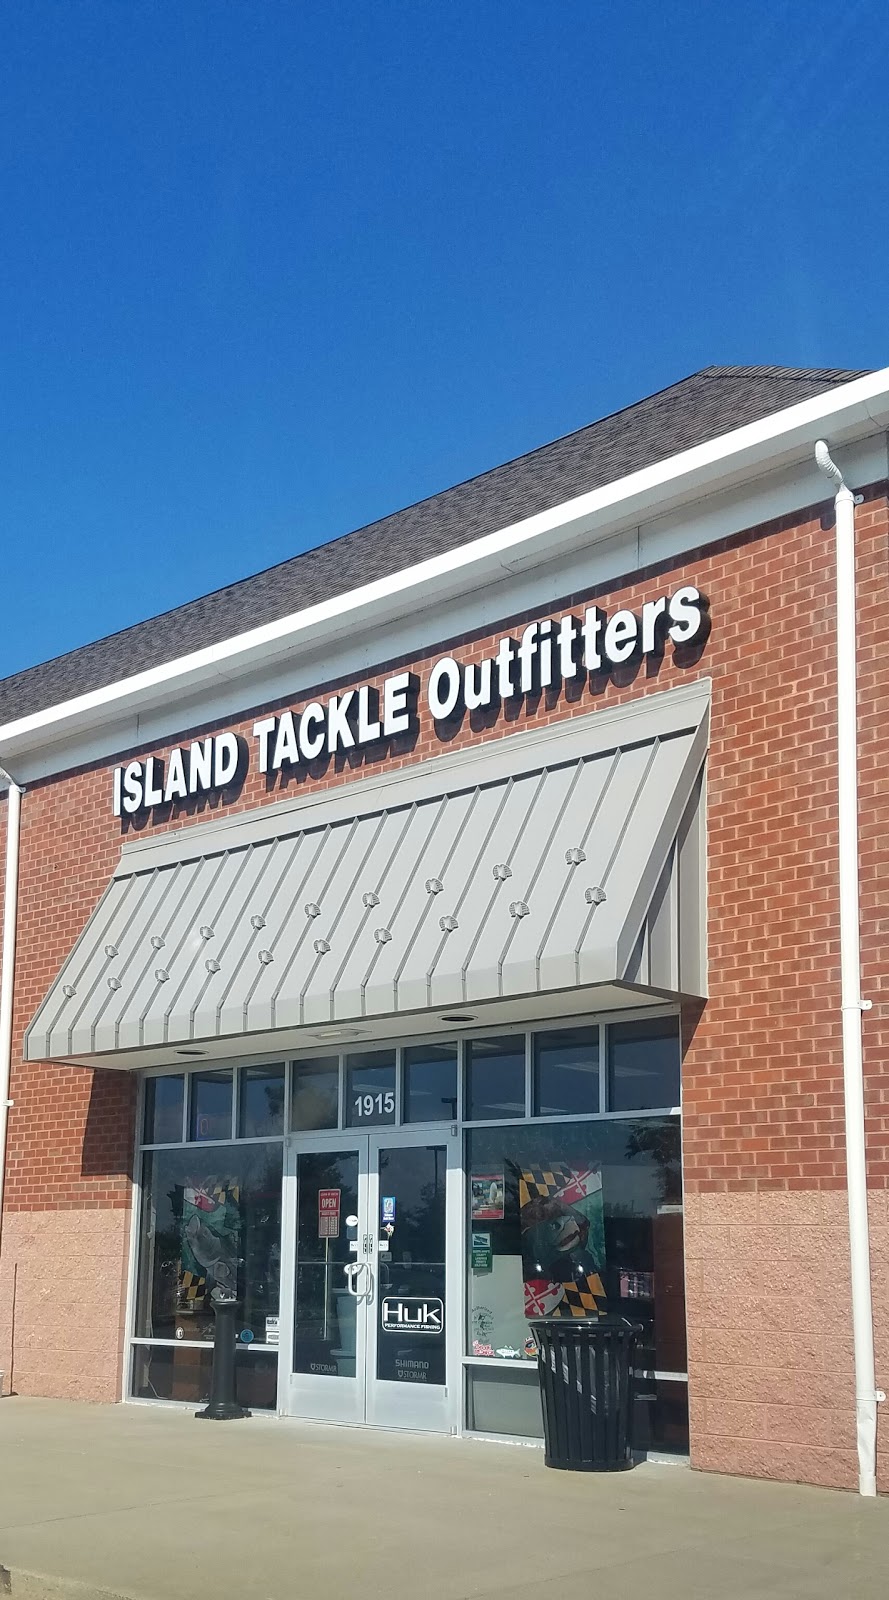 Island Tackle Outfitters | 1915 Main St, Chester, MD 21619 | Phone: (410) 643-4099